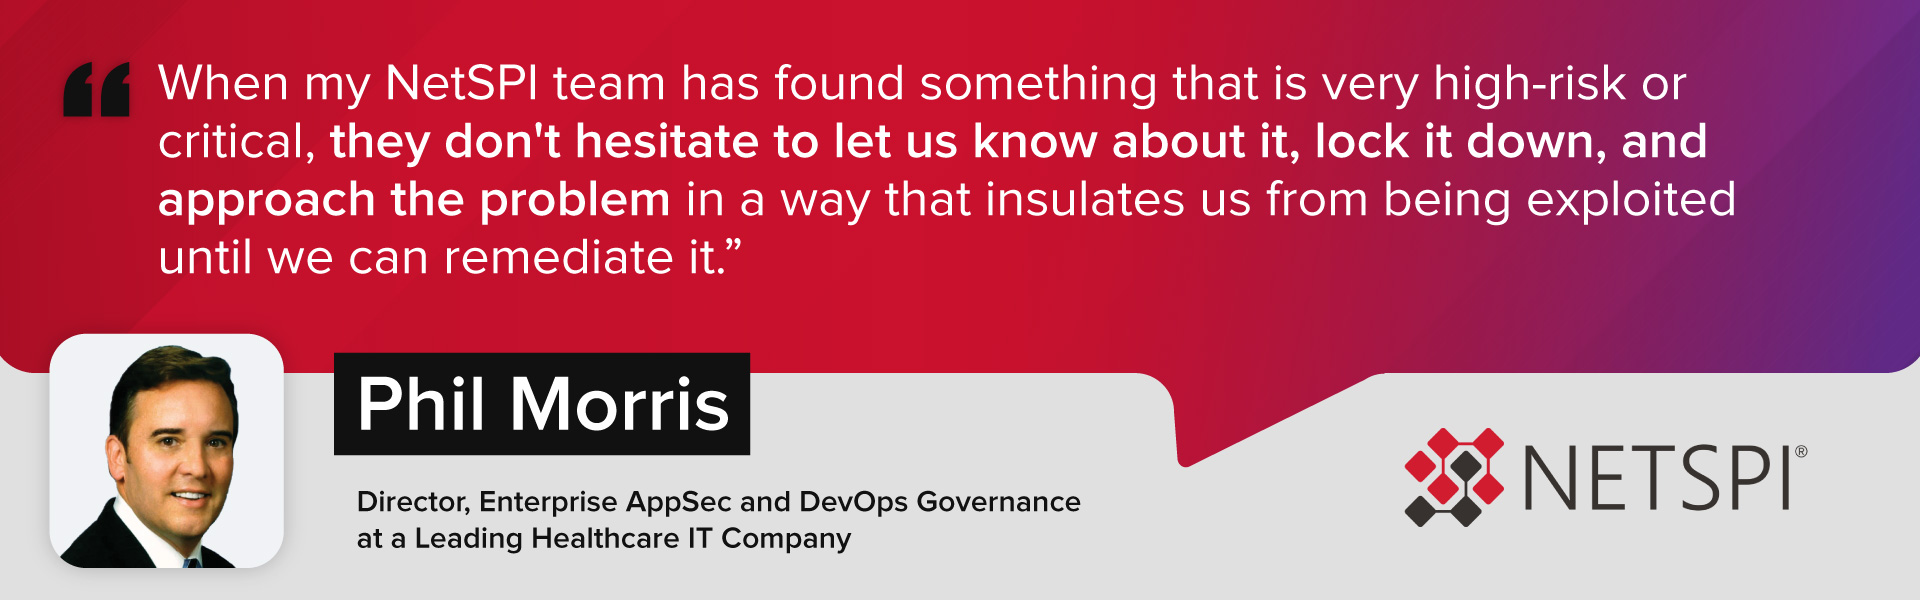 "When my NetSPI team has found something that is very high-risk or critical, they don't hesitate to let us know about it, lock it down, and approach the problem in a way that insulates us from being exploited until we can remediate it." – Phil Morris, Director, Enterprise AppSec and DevOps Governance at a Leading Healthcare IT Company